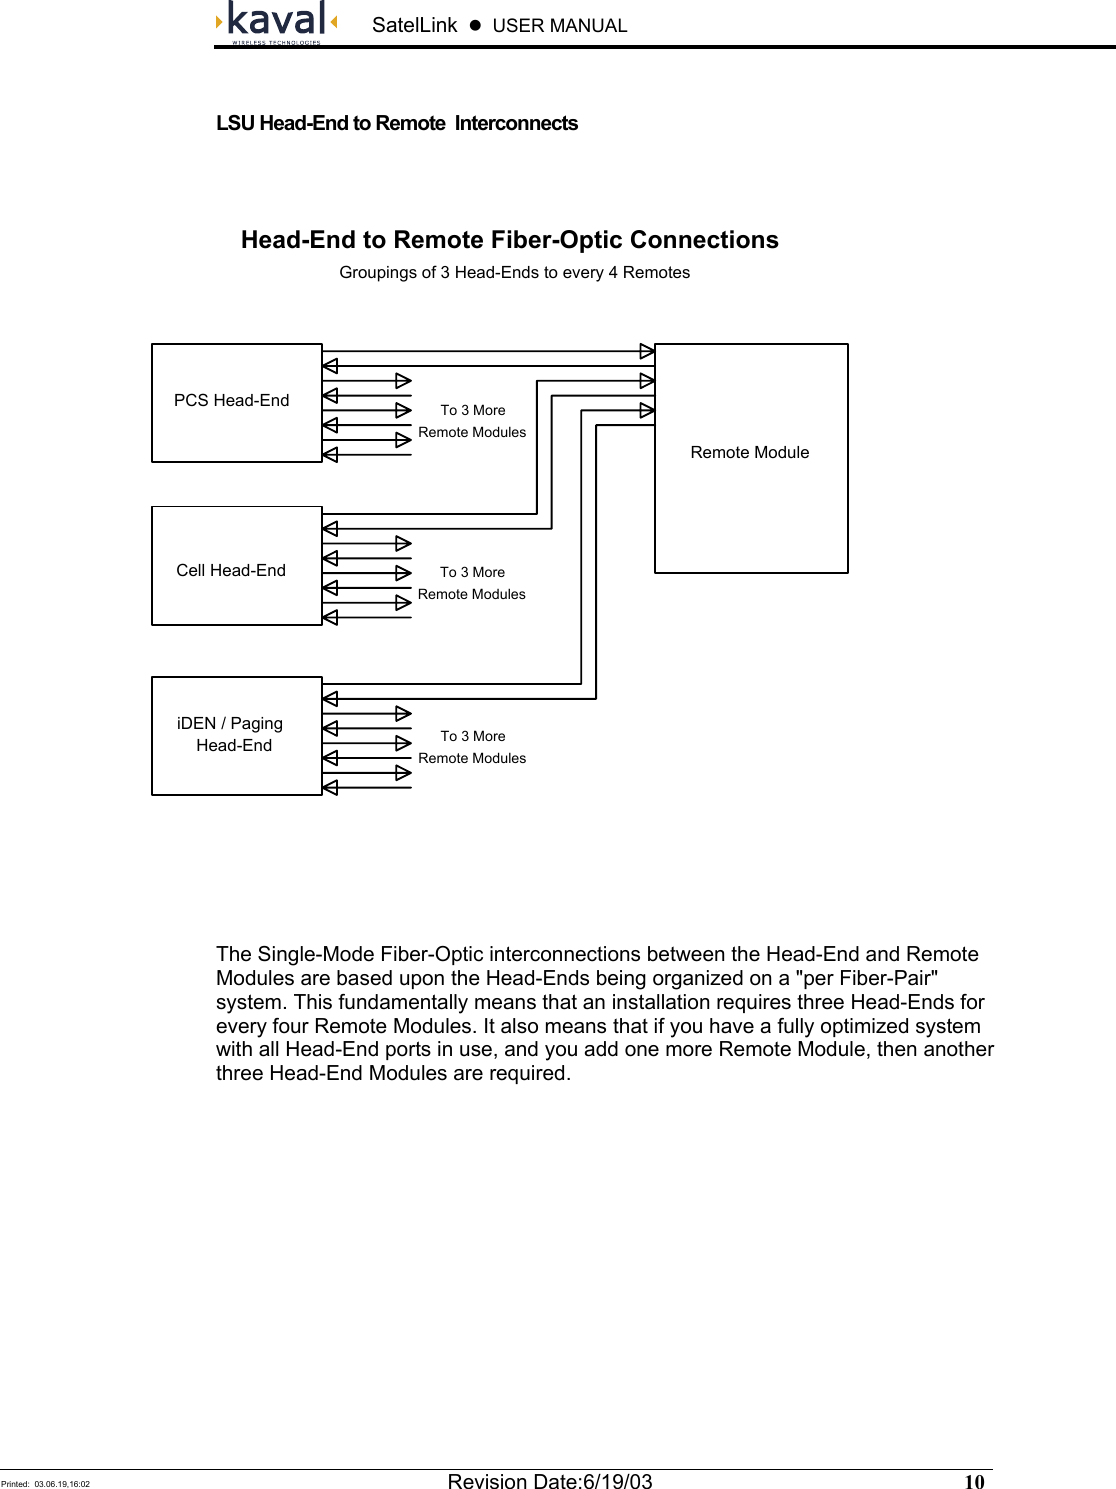  SatelLink  z  USER MANUAL   Printed:  03.06.19,16:02  Revision Date:6/19/03   10    LSU Head-End to Remote  Interconnects   The Single-Mode Fiber-Optic interconnections between the Head-End and Remote Modules are based upon the Head-Ends being organized on a &quot;per Fiber-Pair&quot; system. This fundamentally means that an installation requires three Head-Ends for every four Remote Modules. It also means that if you have a fully optimized system with all Head-End ports in use, and you add one more Remote Module, then another three Head-End Modules are required. Head-End to Remote Fiber-Optic ConnectionsGroupings of 3 Head-Ends to every 4 RemotesPCS Head-EndCell Head-EndHead-EndiDEN / PagingRemote ModuleRemote ModulesTo 3 MoreRemote ModulesTo 3 MoreRemote ModulesTo 3 More